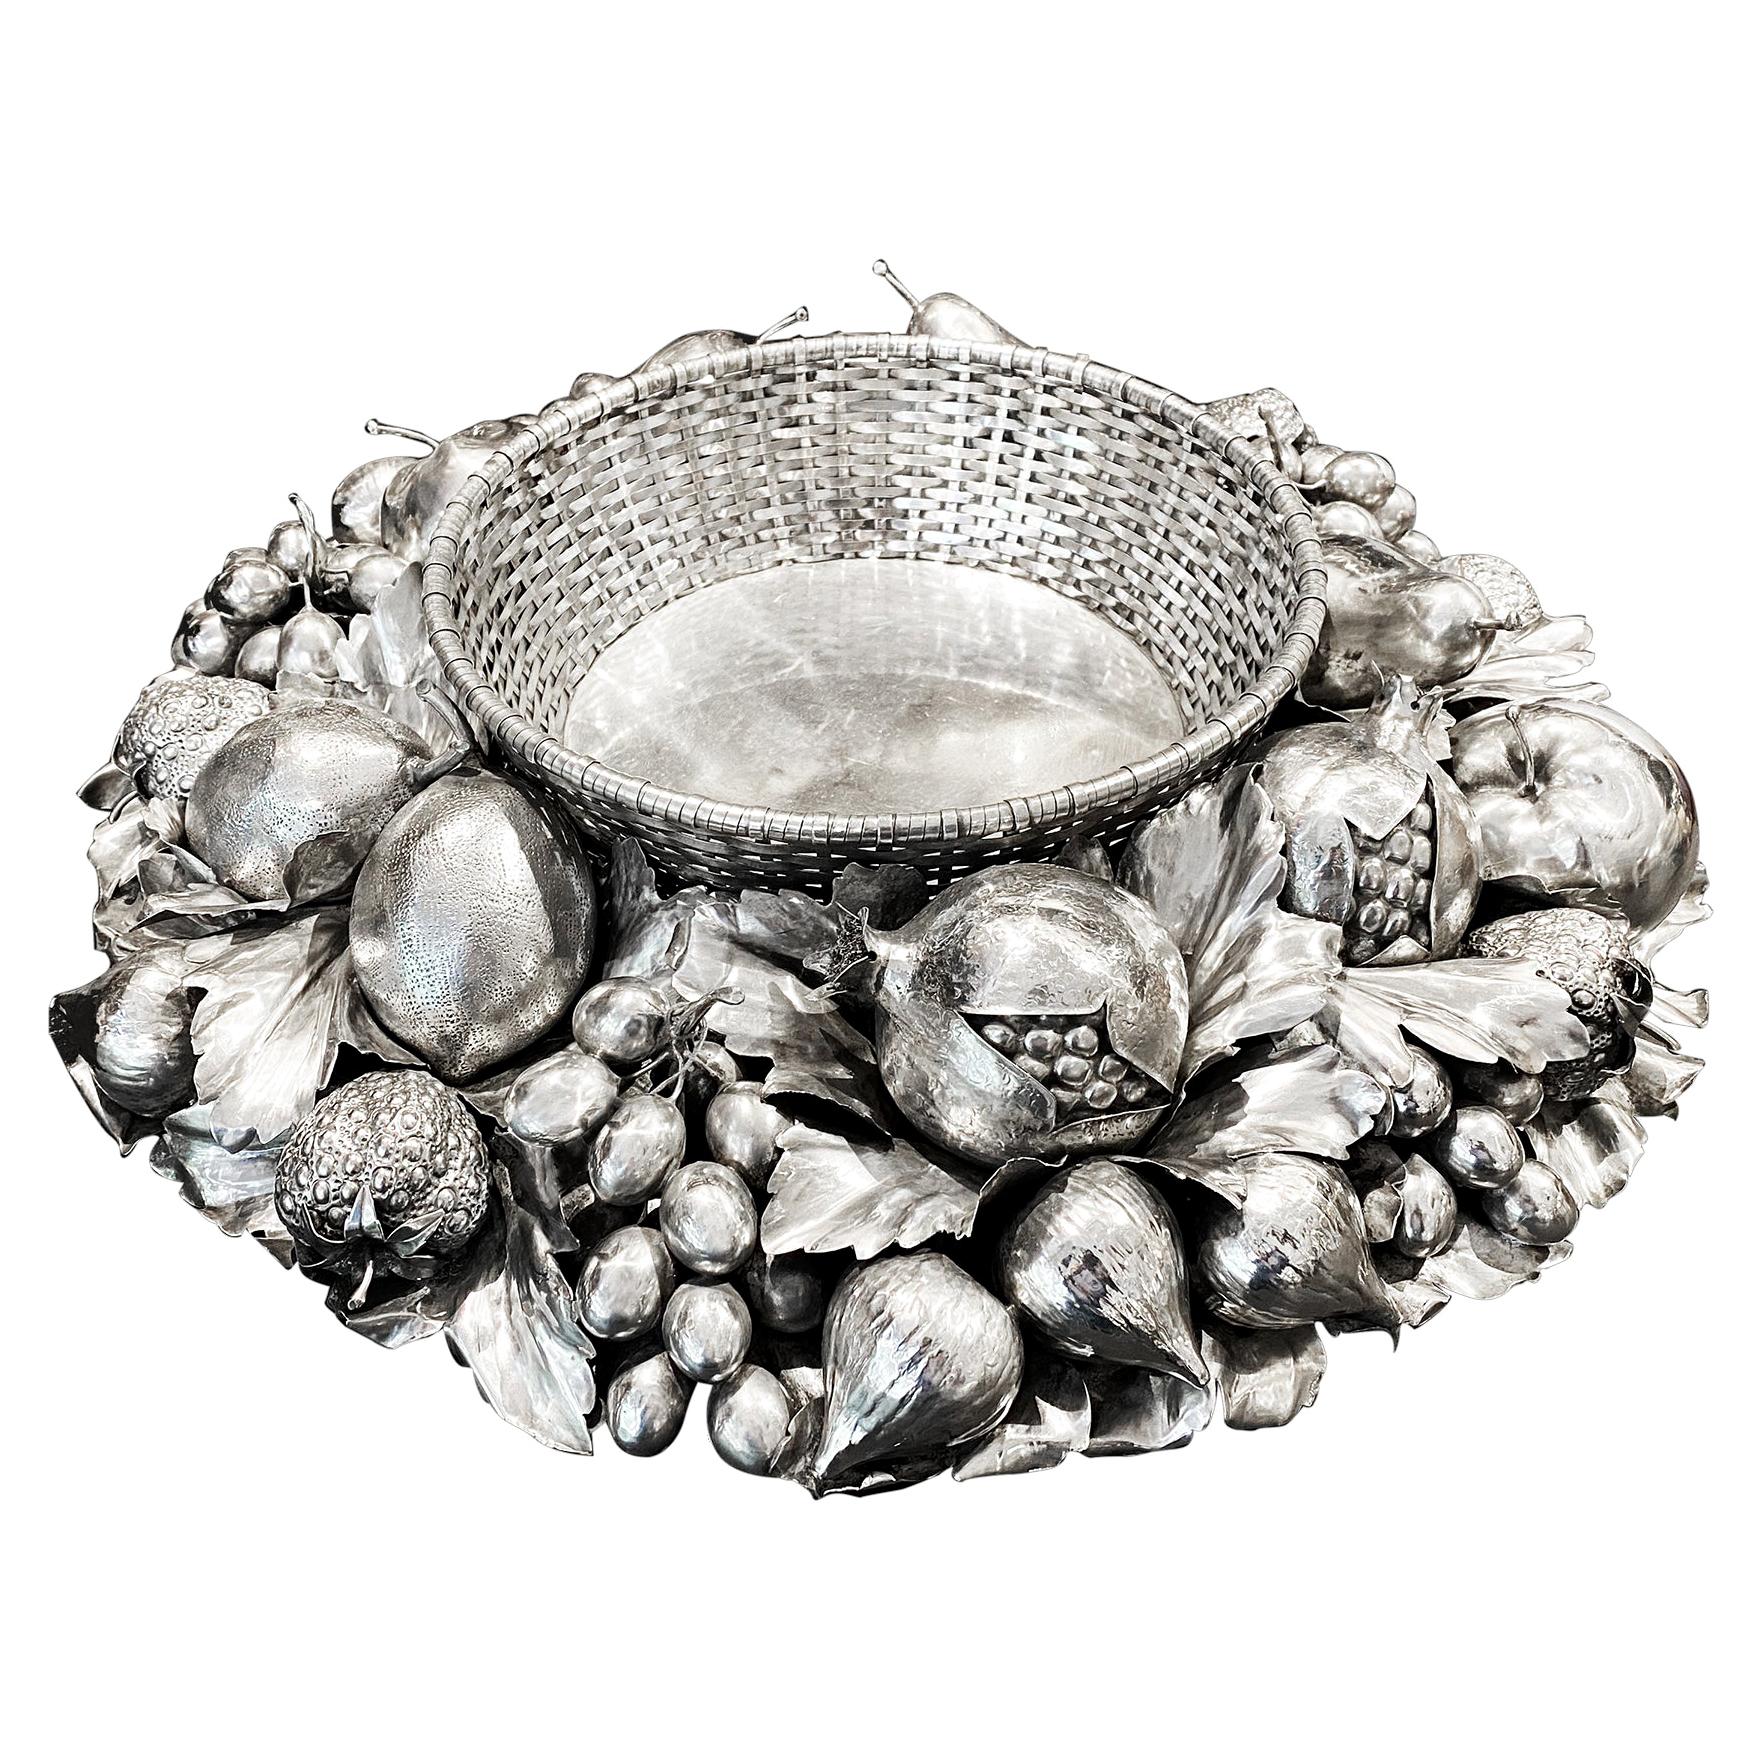 Buccellati Centerpiece Basket of Fruits, Silver Sterling, Mid 20th Century